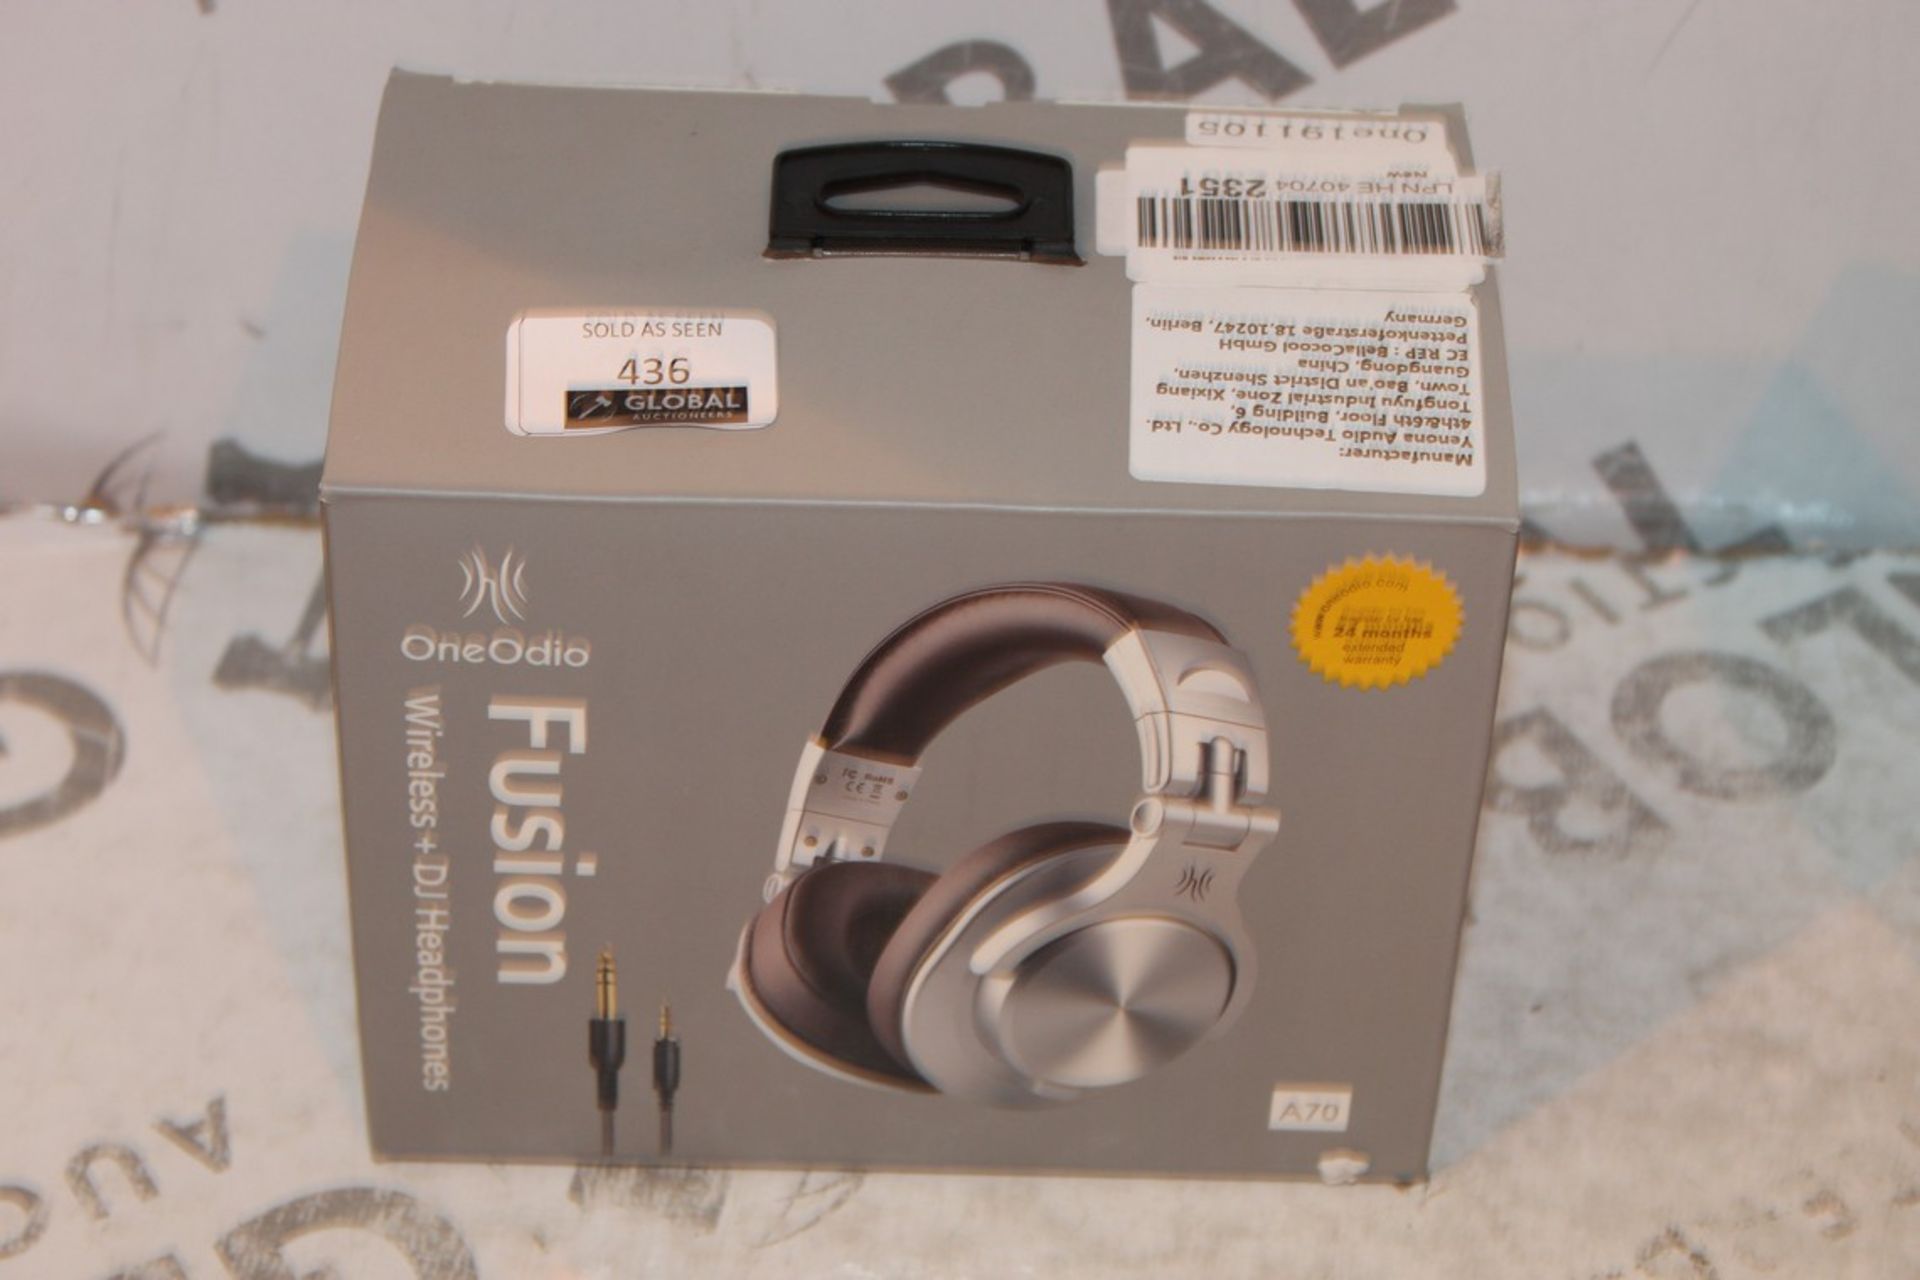 Lot to Contain 3 Pairs of One Odio Fushion A70 Silver Wireless DJ Headphones RRP £105 Combined (